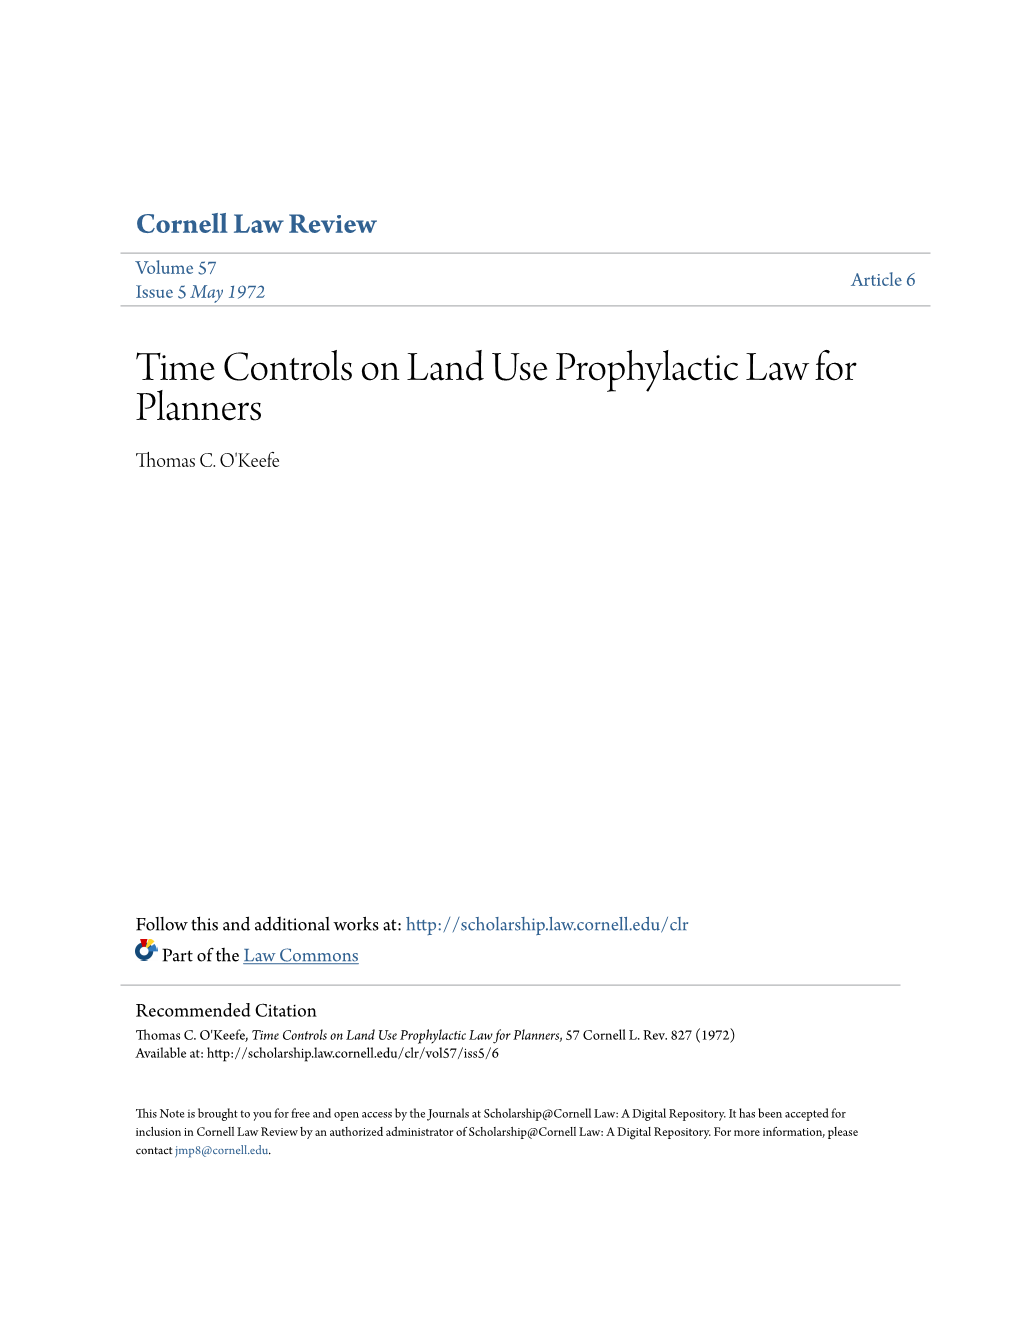 Time Controls on Land Use Prophylactic Law for Planners Thomas C